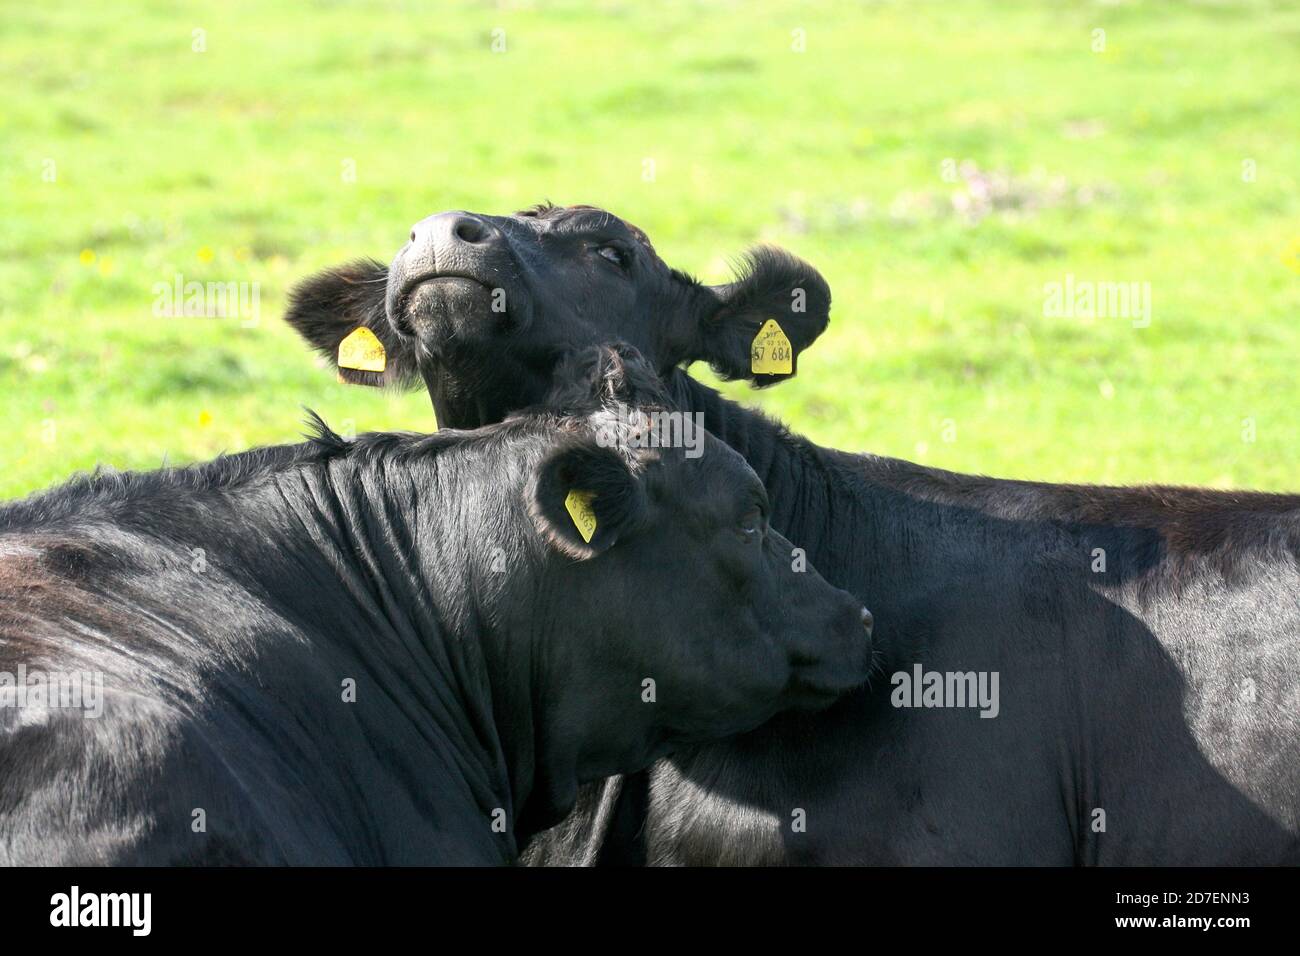 Two cows portrait, one cow looks to the sky. Stock Photo